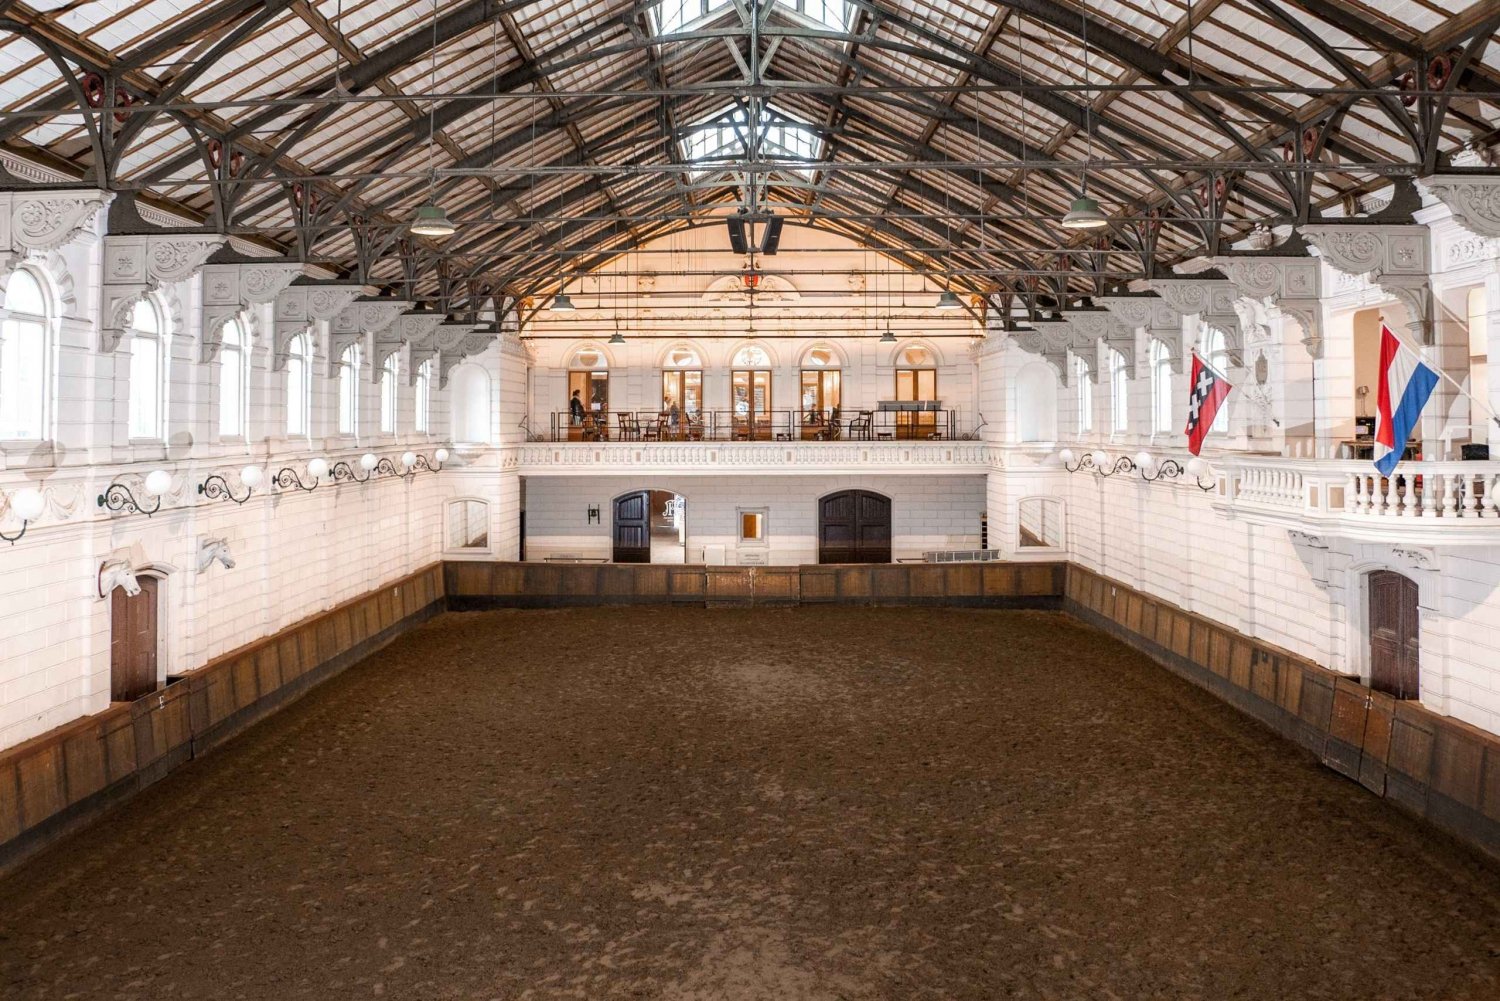 Amsterdam: The 'Hollandsche Manege' Stables Entry Ticket